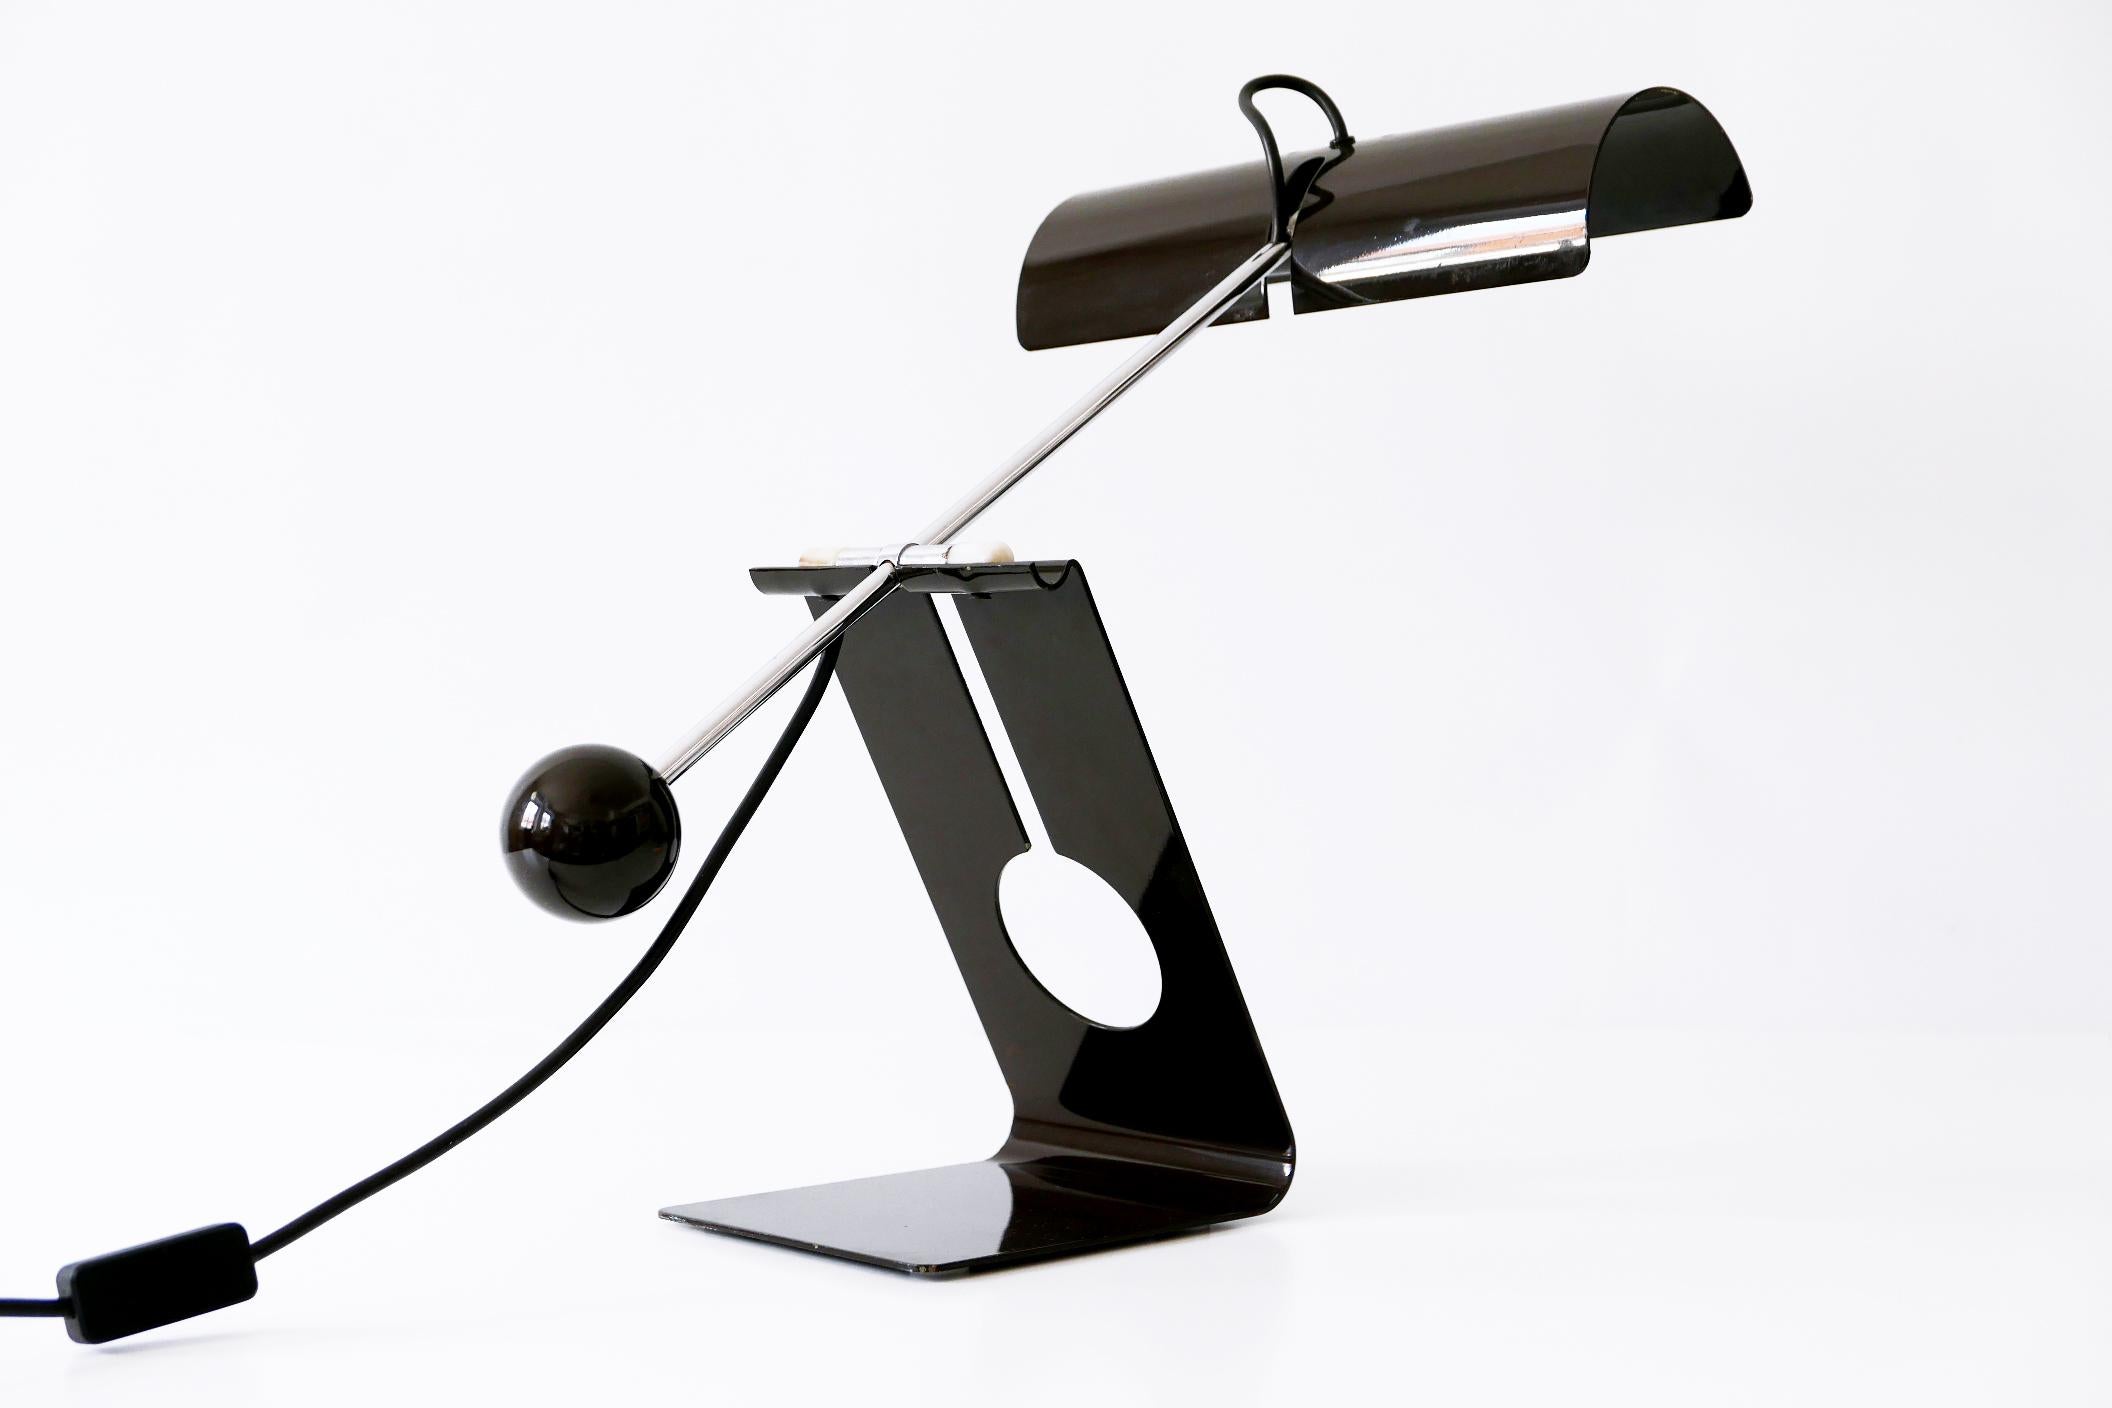 Articulated Table Lamp Picchio by Mauro Martini for Fratelli Martini 1970s Italy For Sale 4